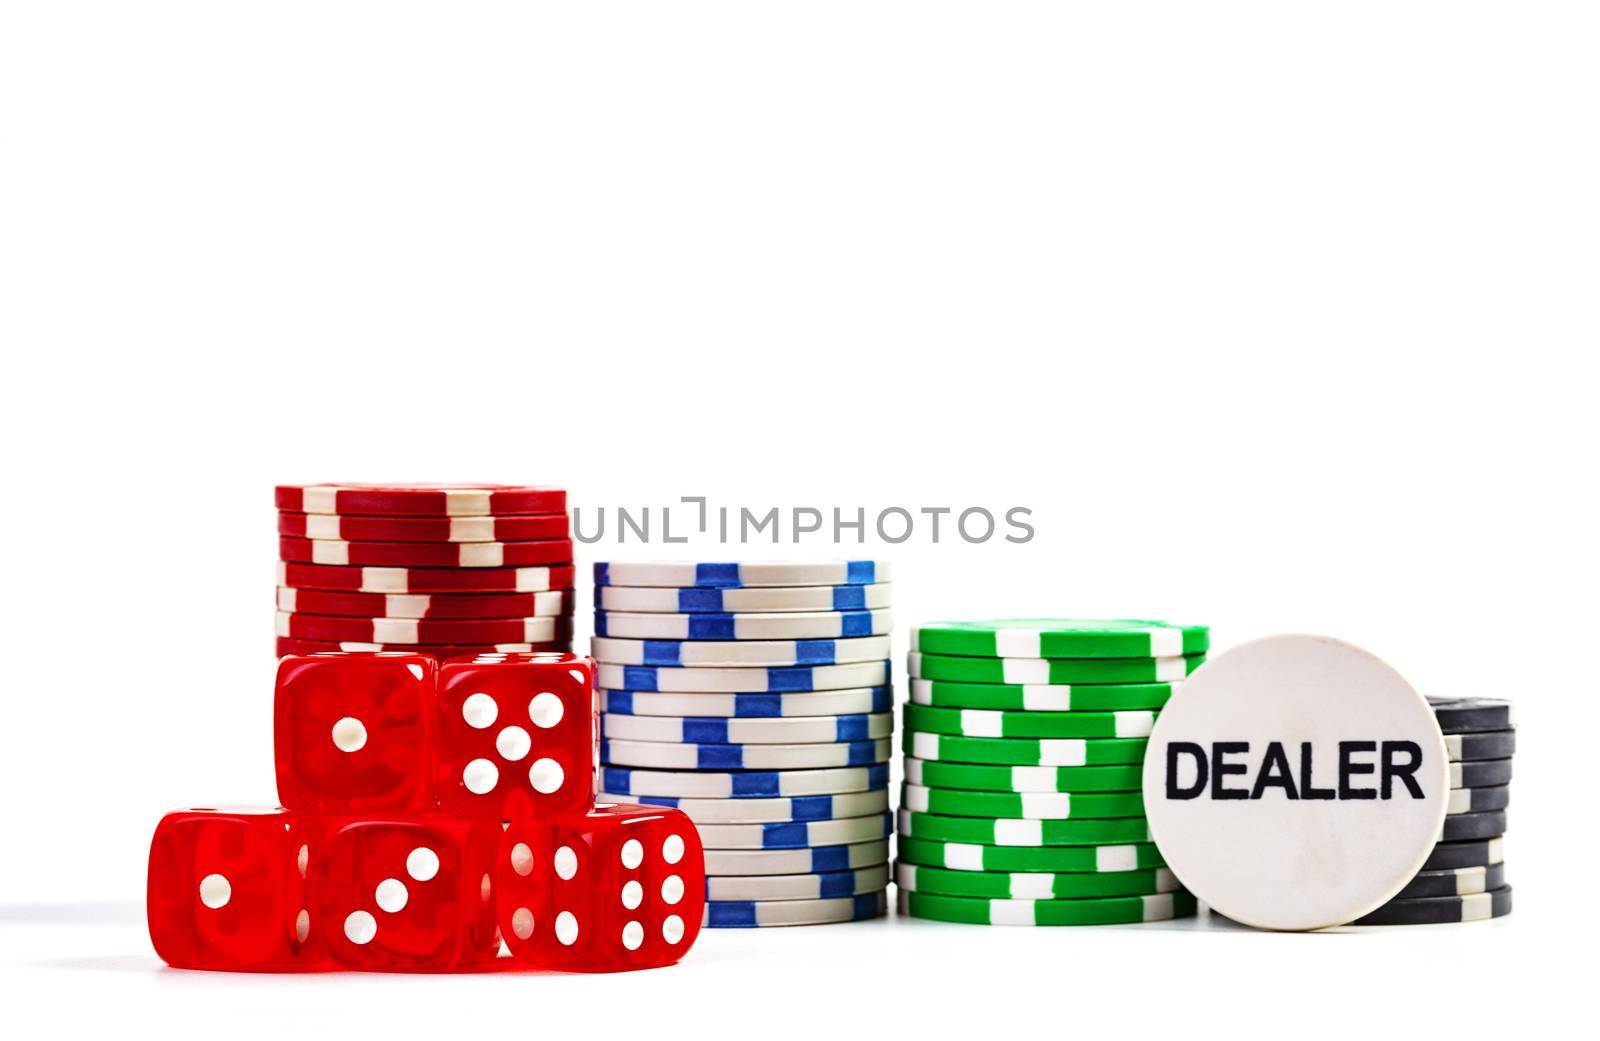 Casino Chips With Red Dice and Dealer Chip Isolated on White Background